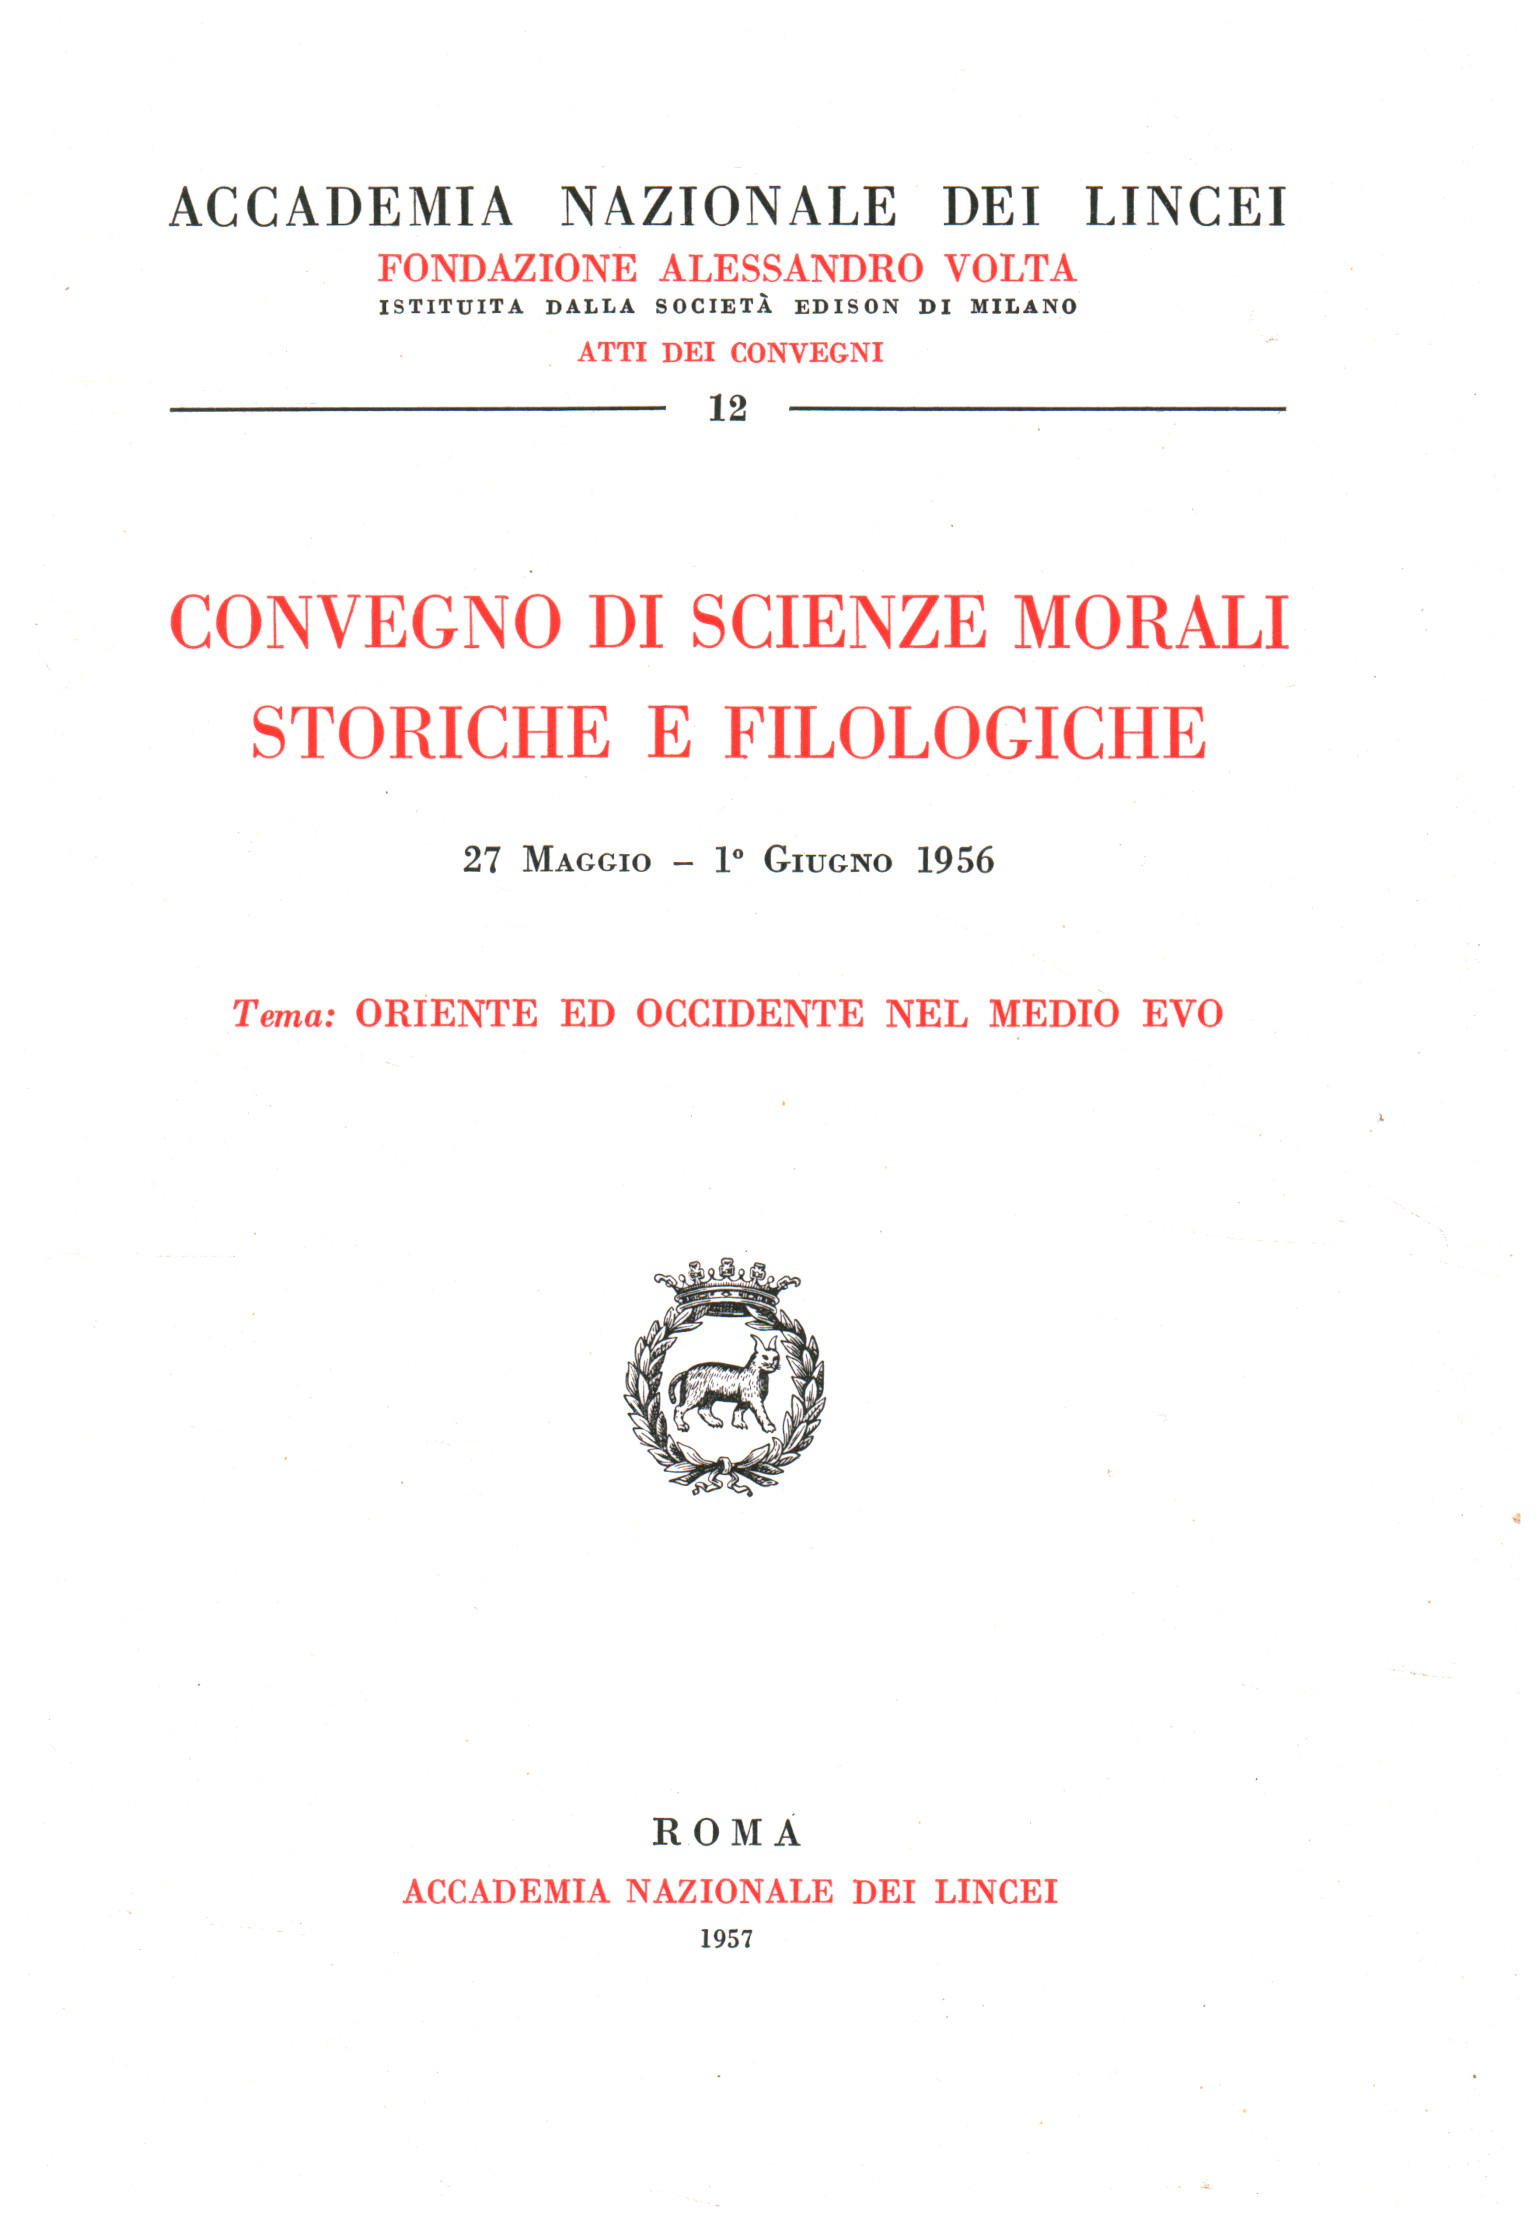 Conference of Historical Moral Sciences e